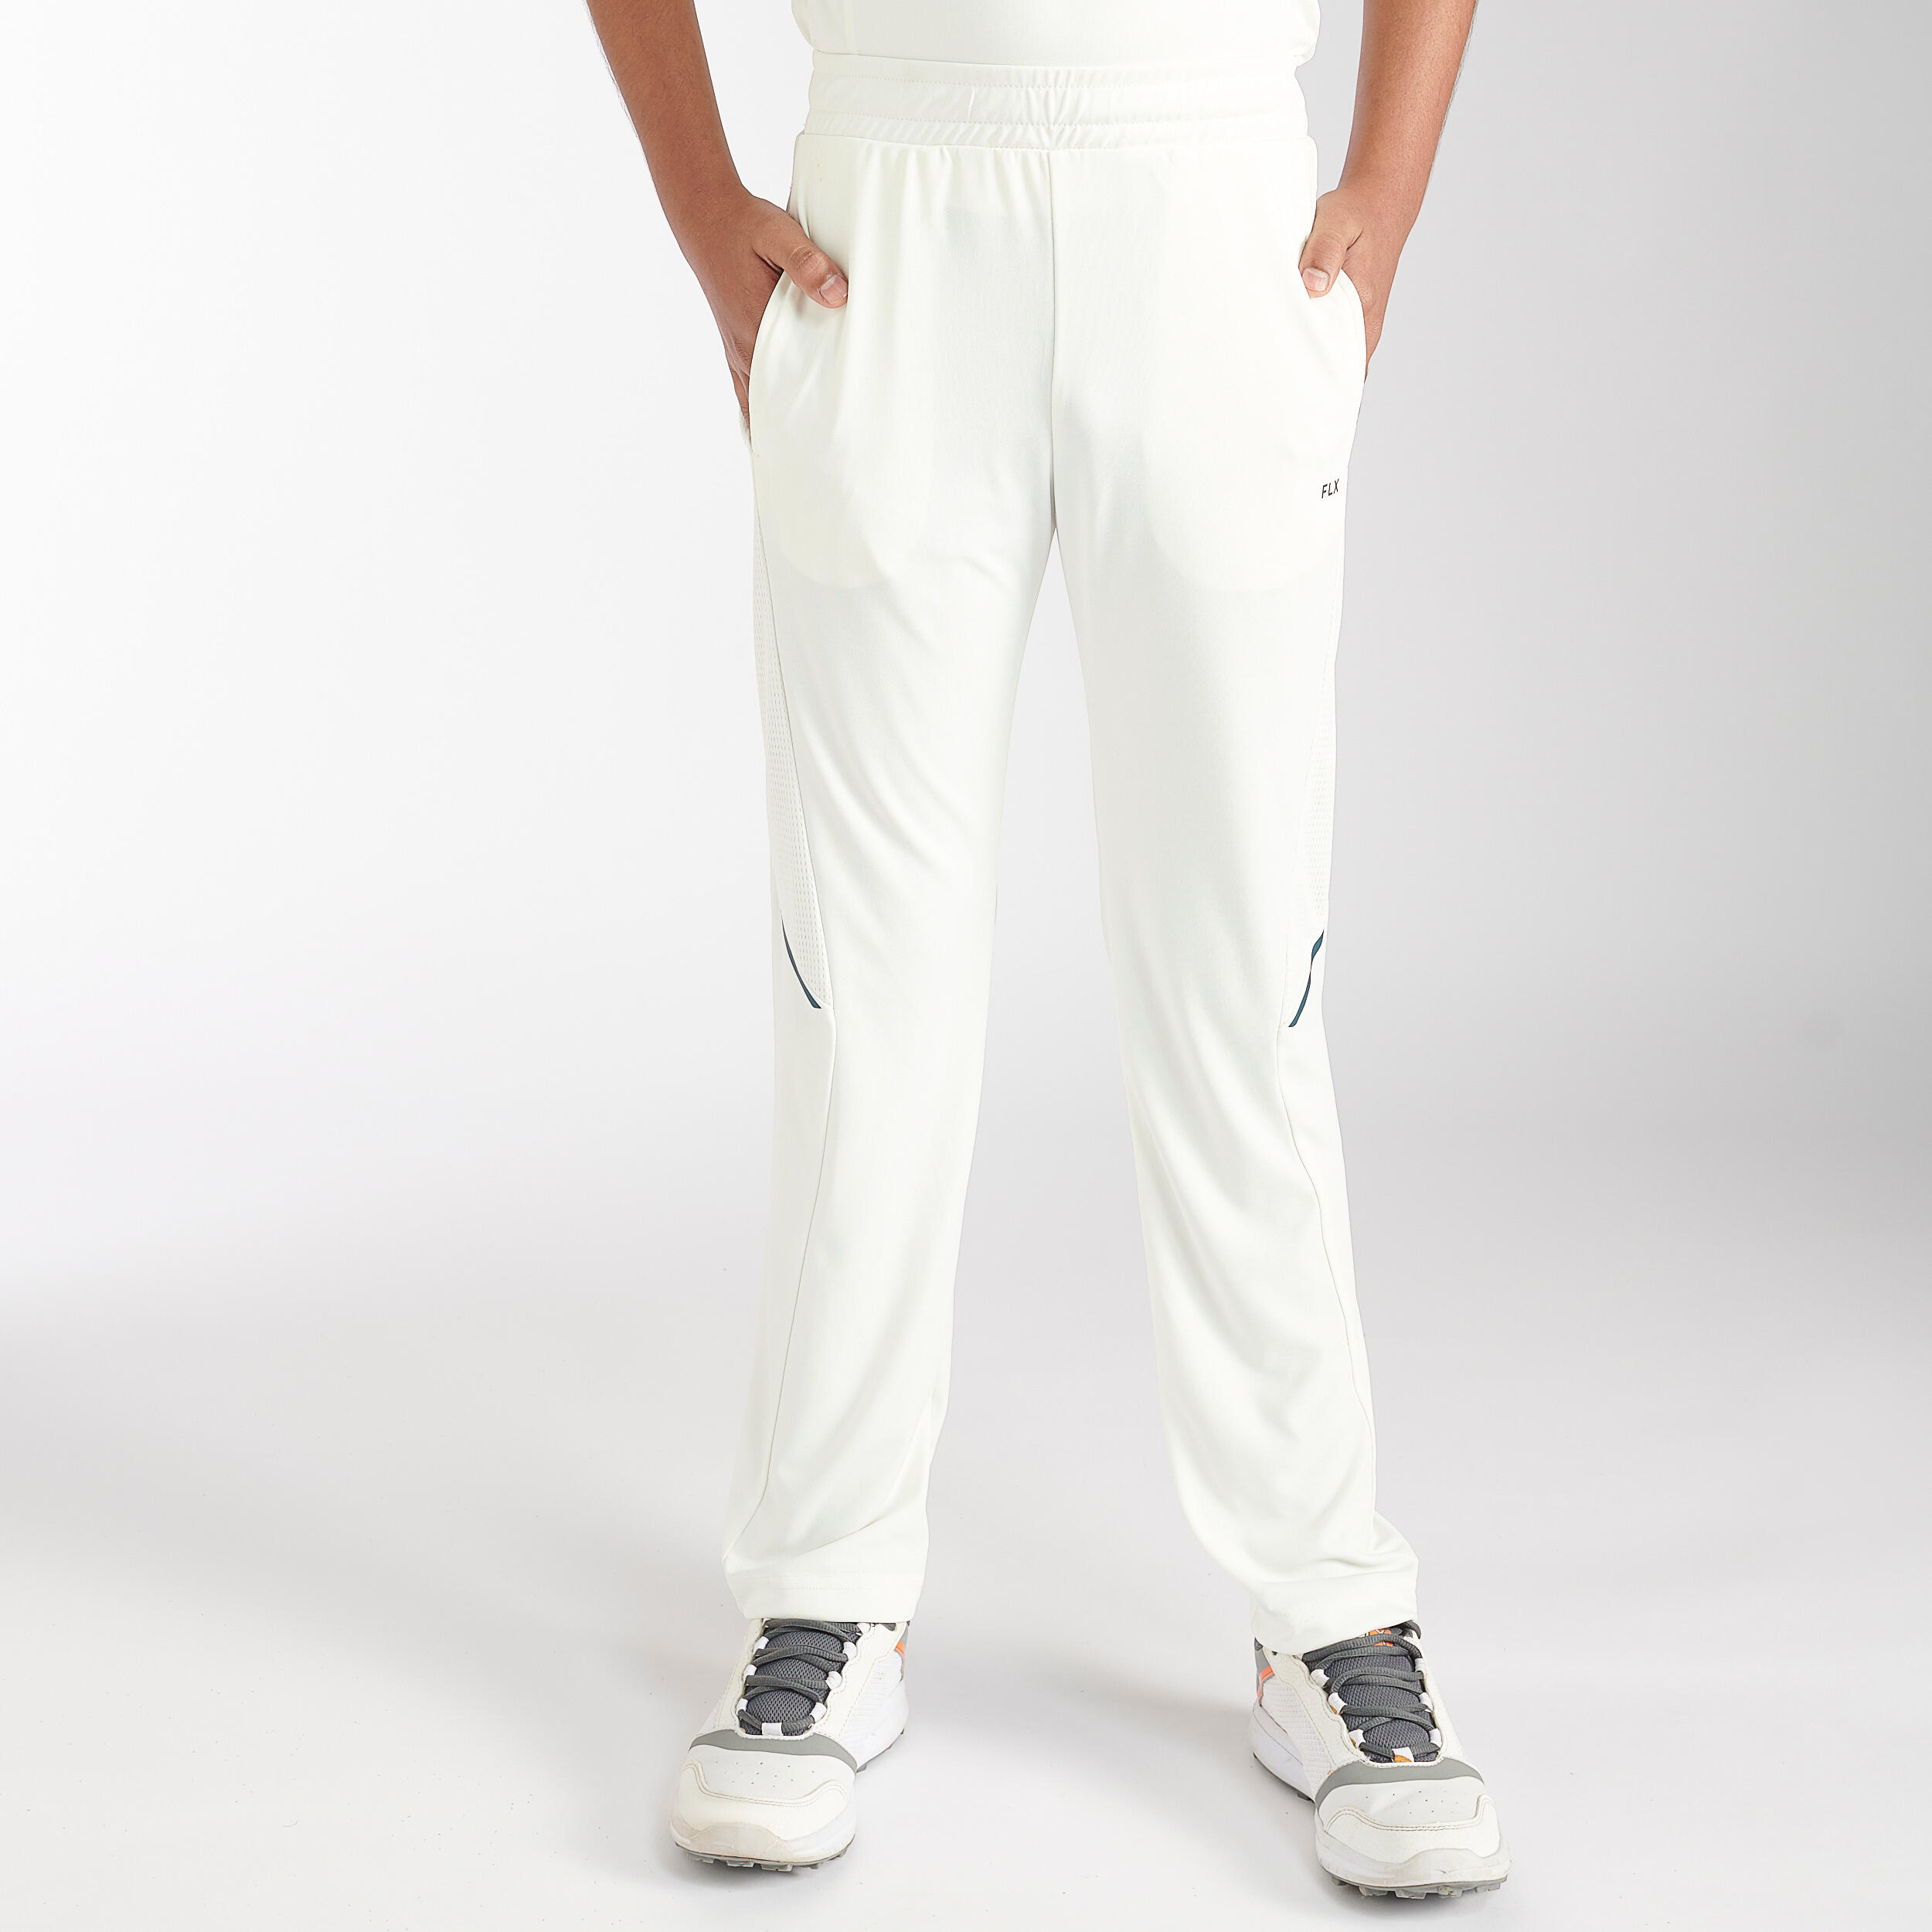 MENS CRICKET STRAIGHT FIT TROUSER CTS 500 DARK BLUE